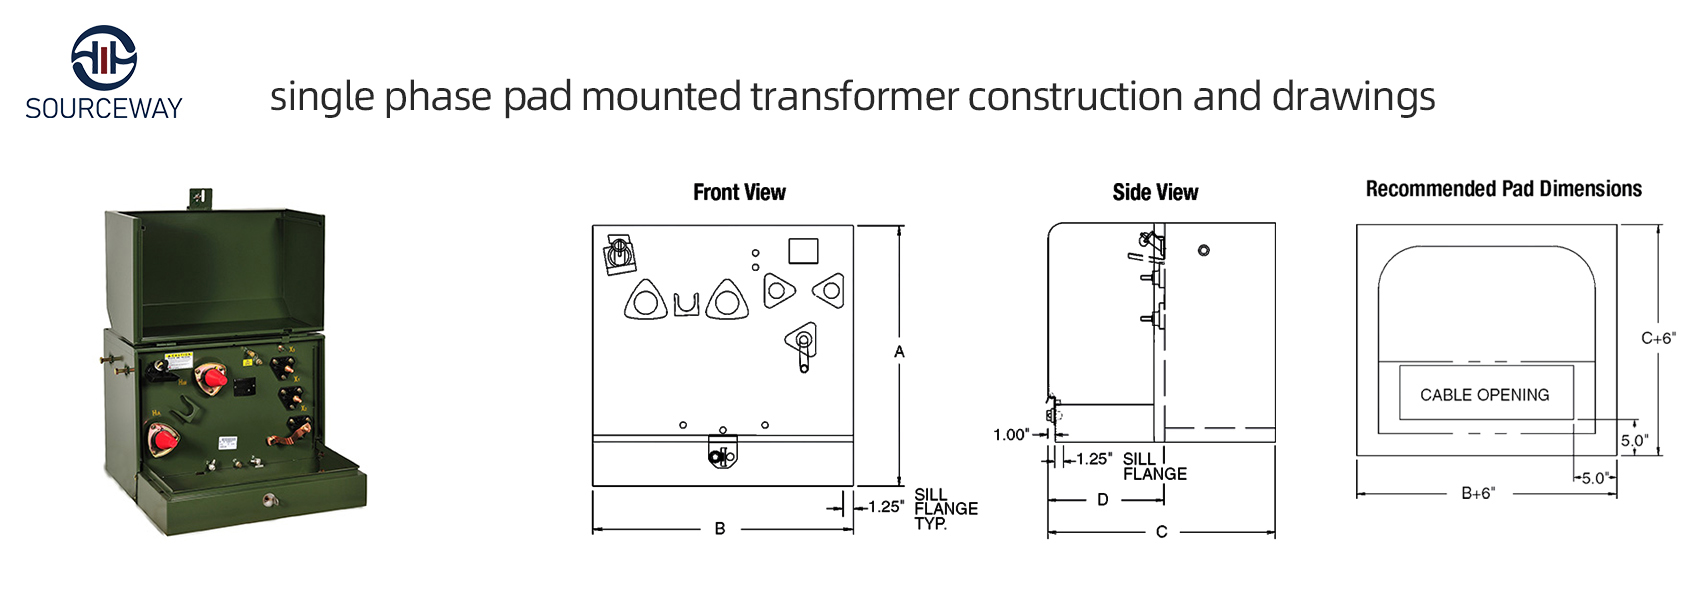 single phase pad mounted transformer construction and drawings